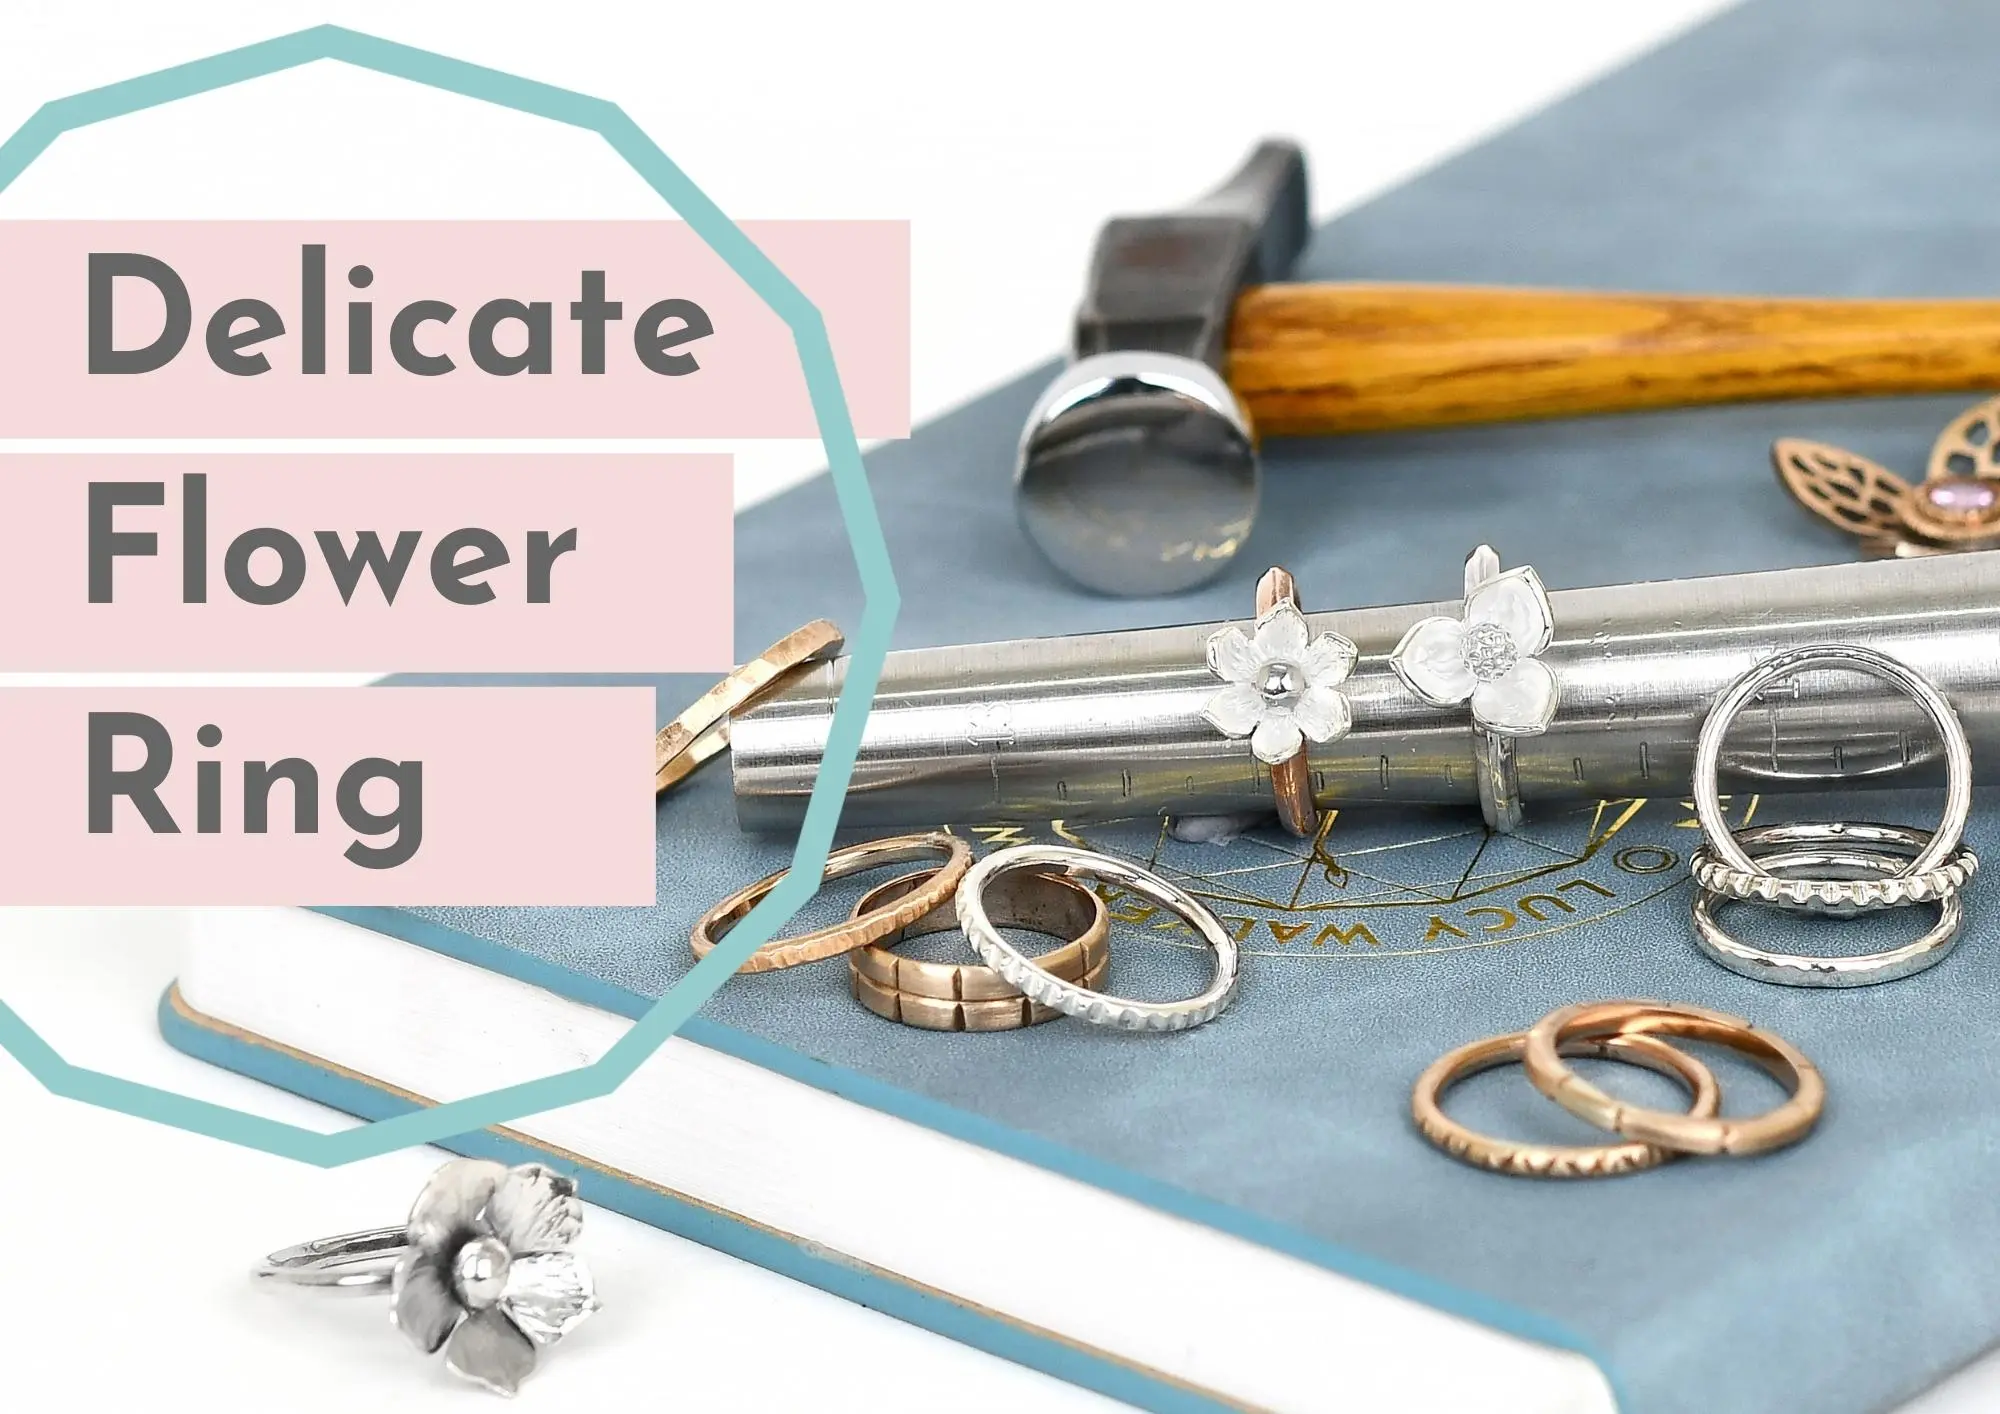 Delicate flower ring class